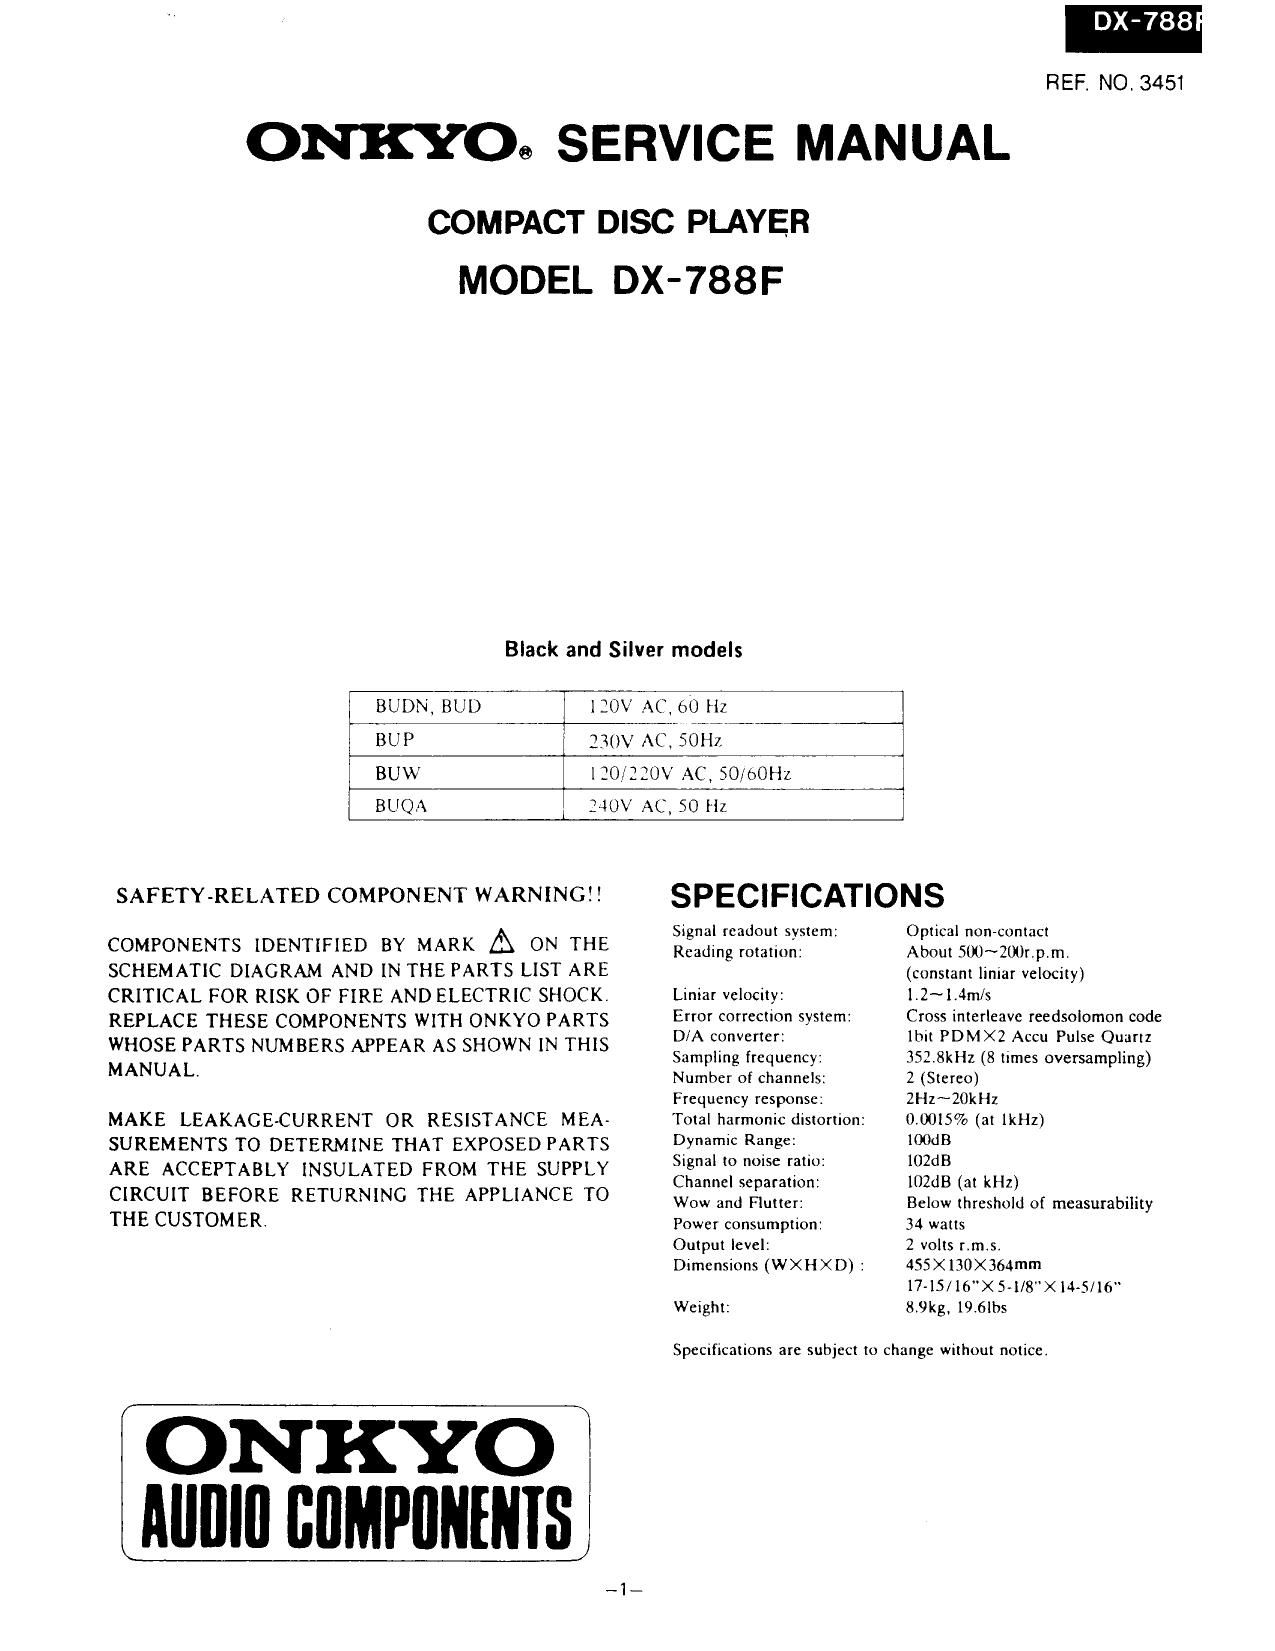 Free Audio Service Manuals - Free download Onkyo DX 788F Service Manual